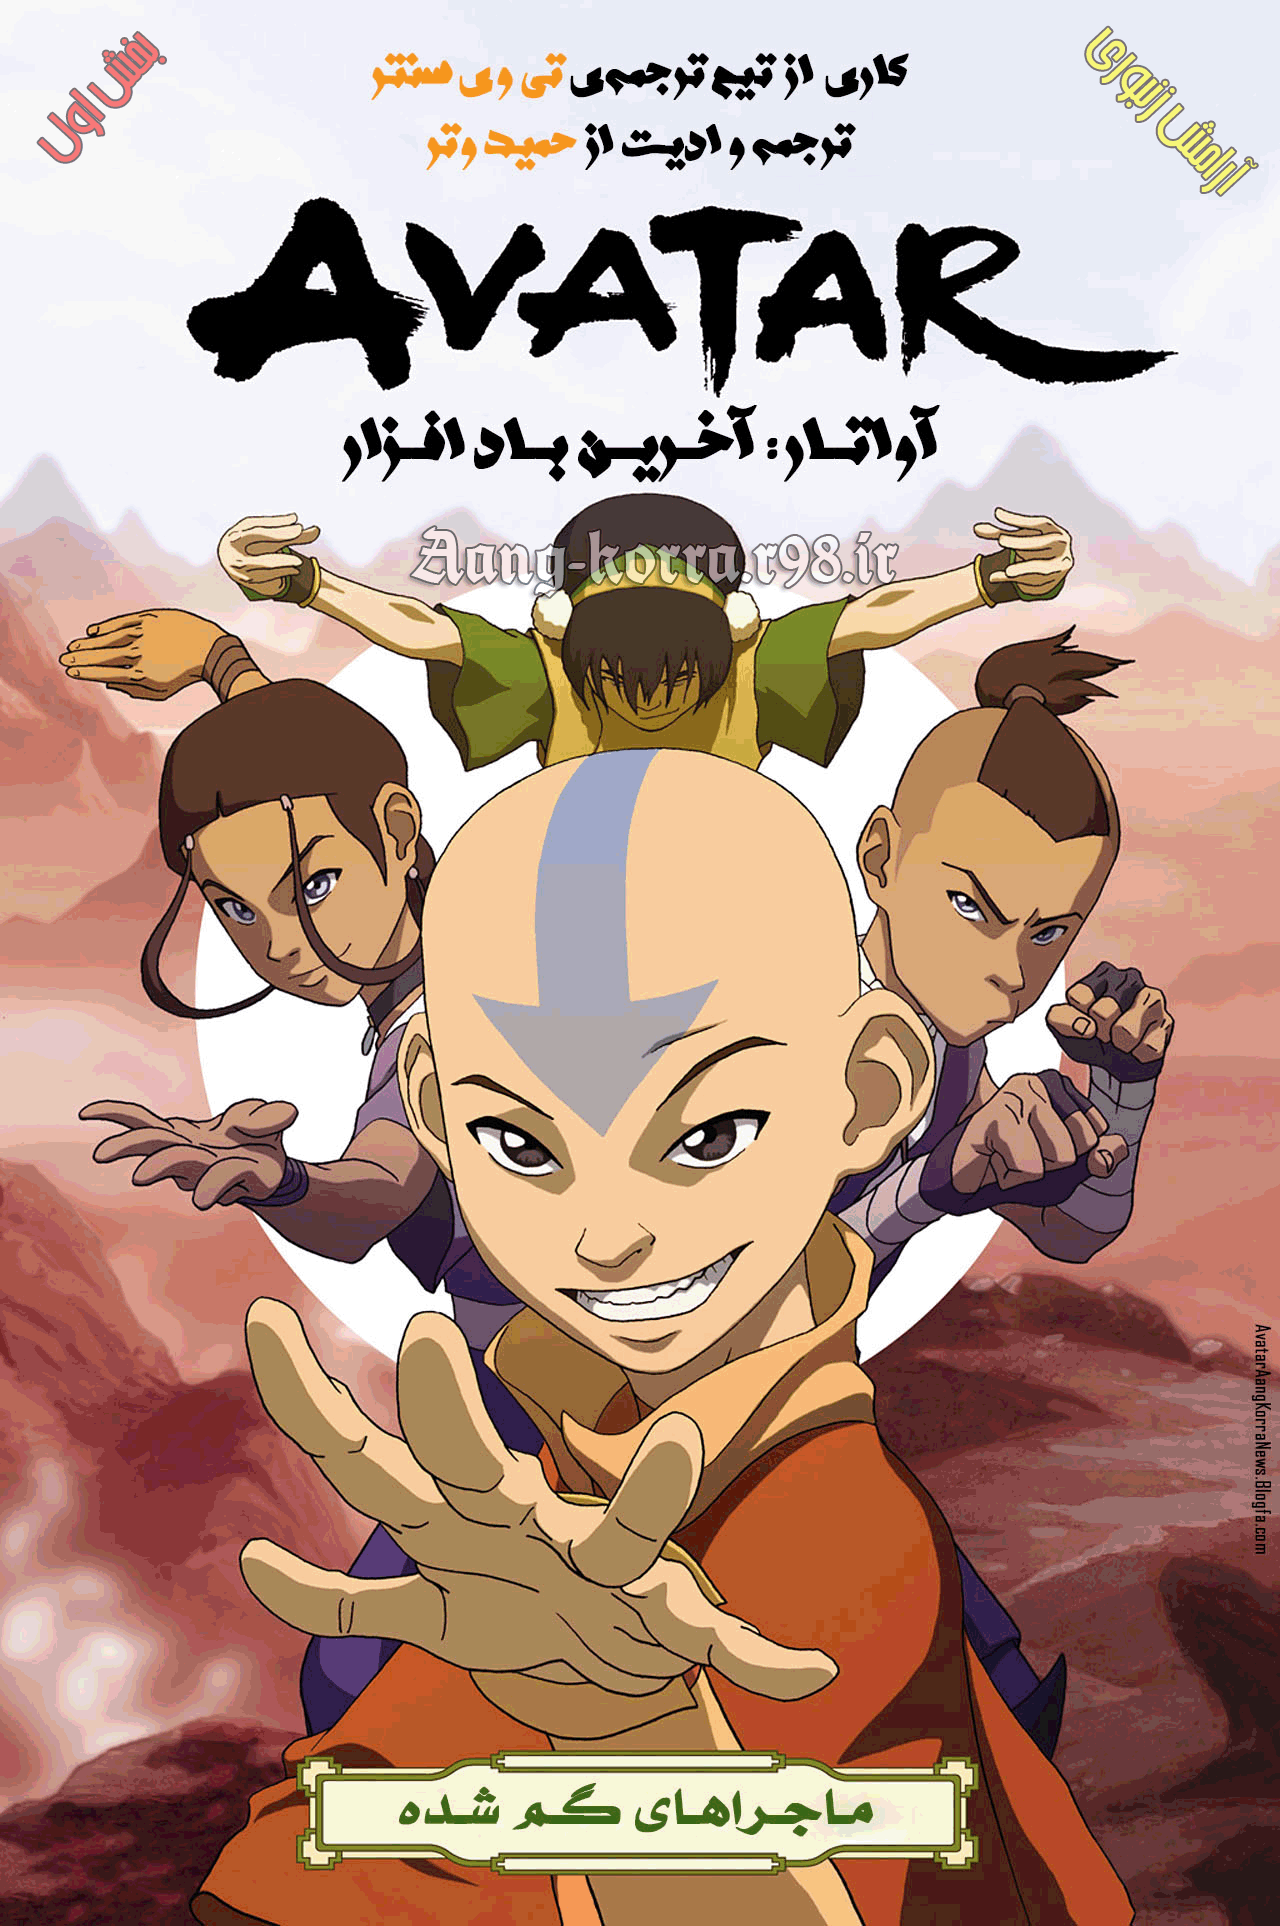 https://rozup.ir/up/aang-korra/Pictures/Avatar%20-%20The%20Last%20Airbender%20-%20The%20Lost%20Adventures-001851930.gif